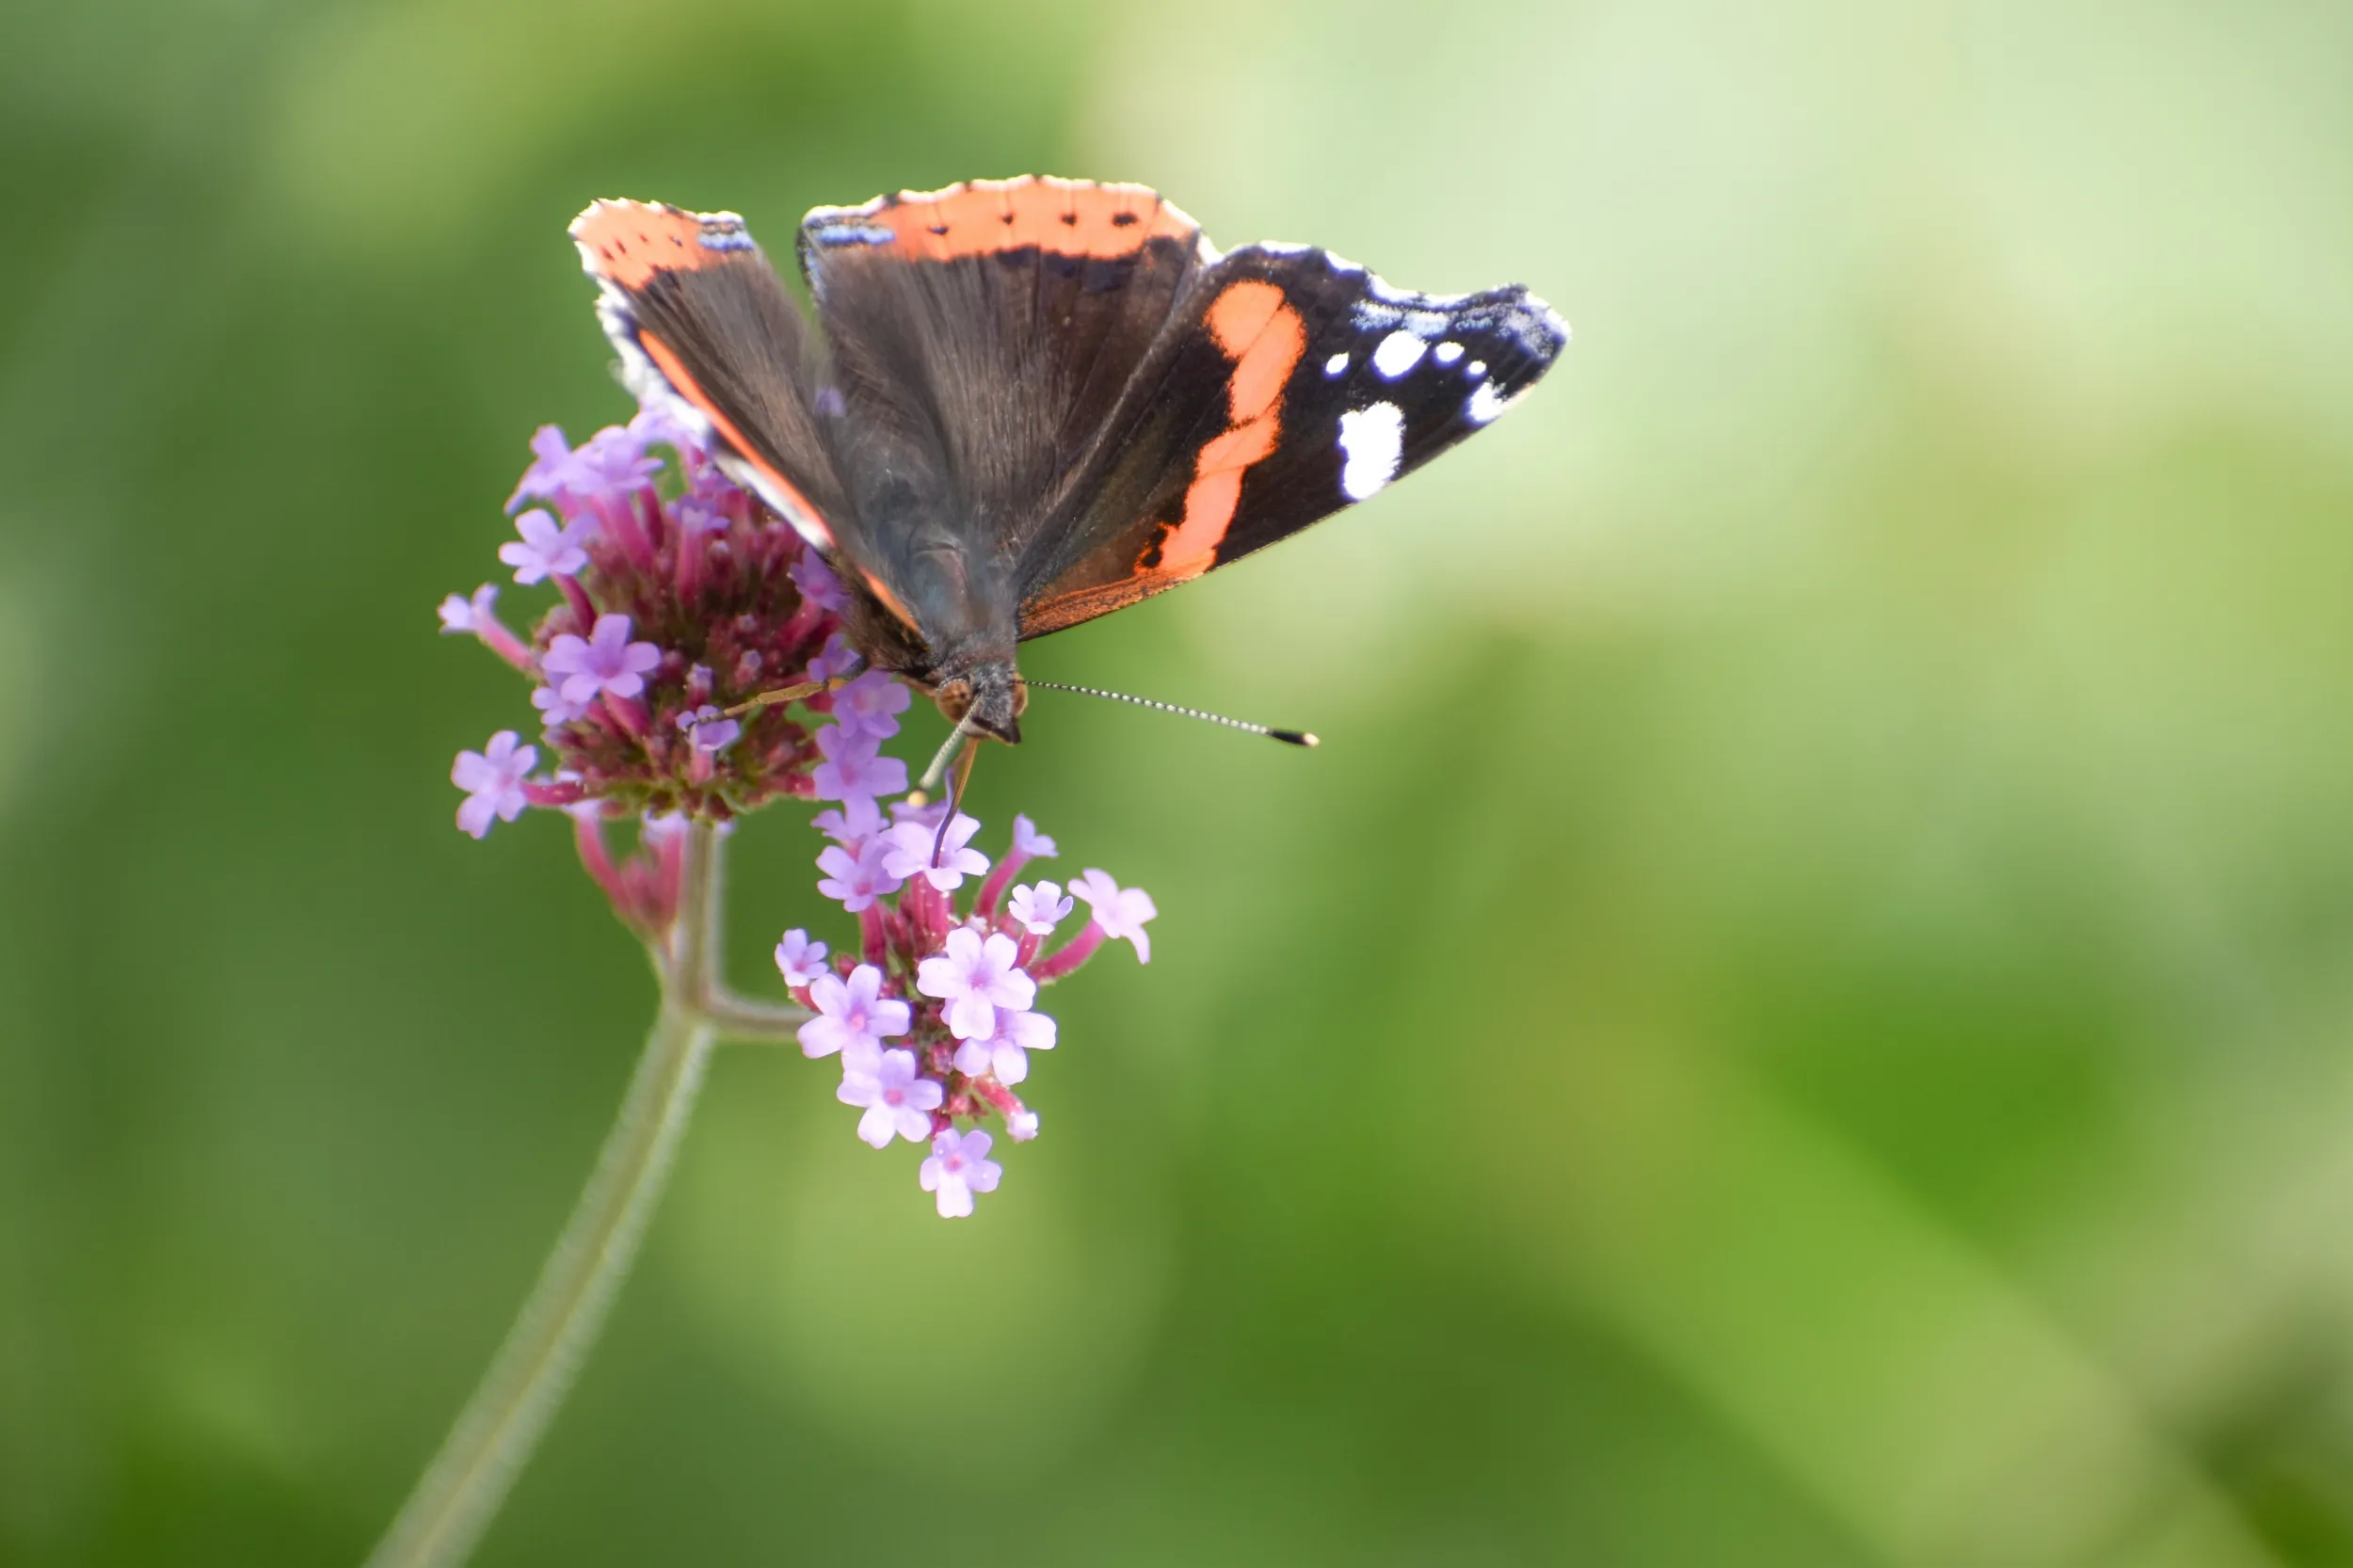 Butterfly perched on a stem topped with small purple flowers